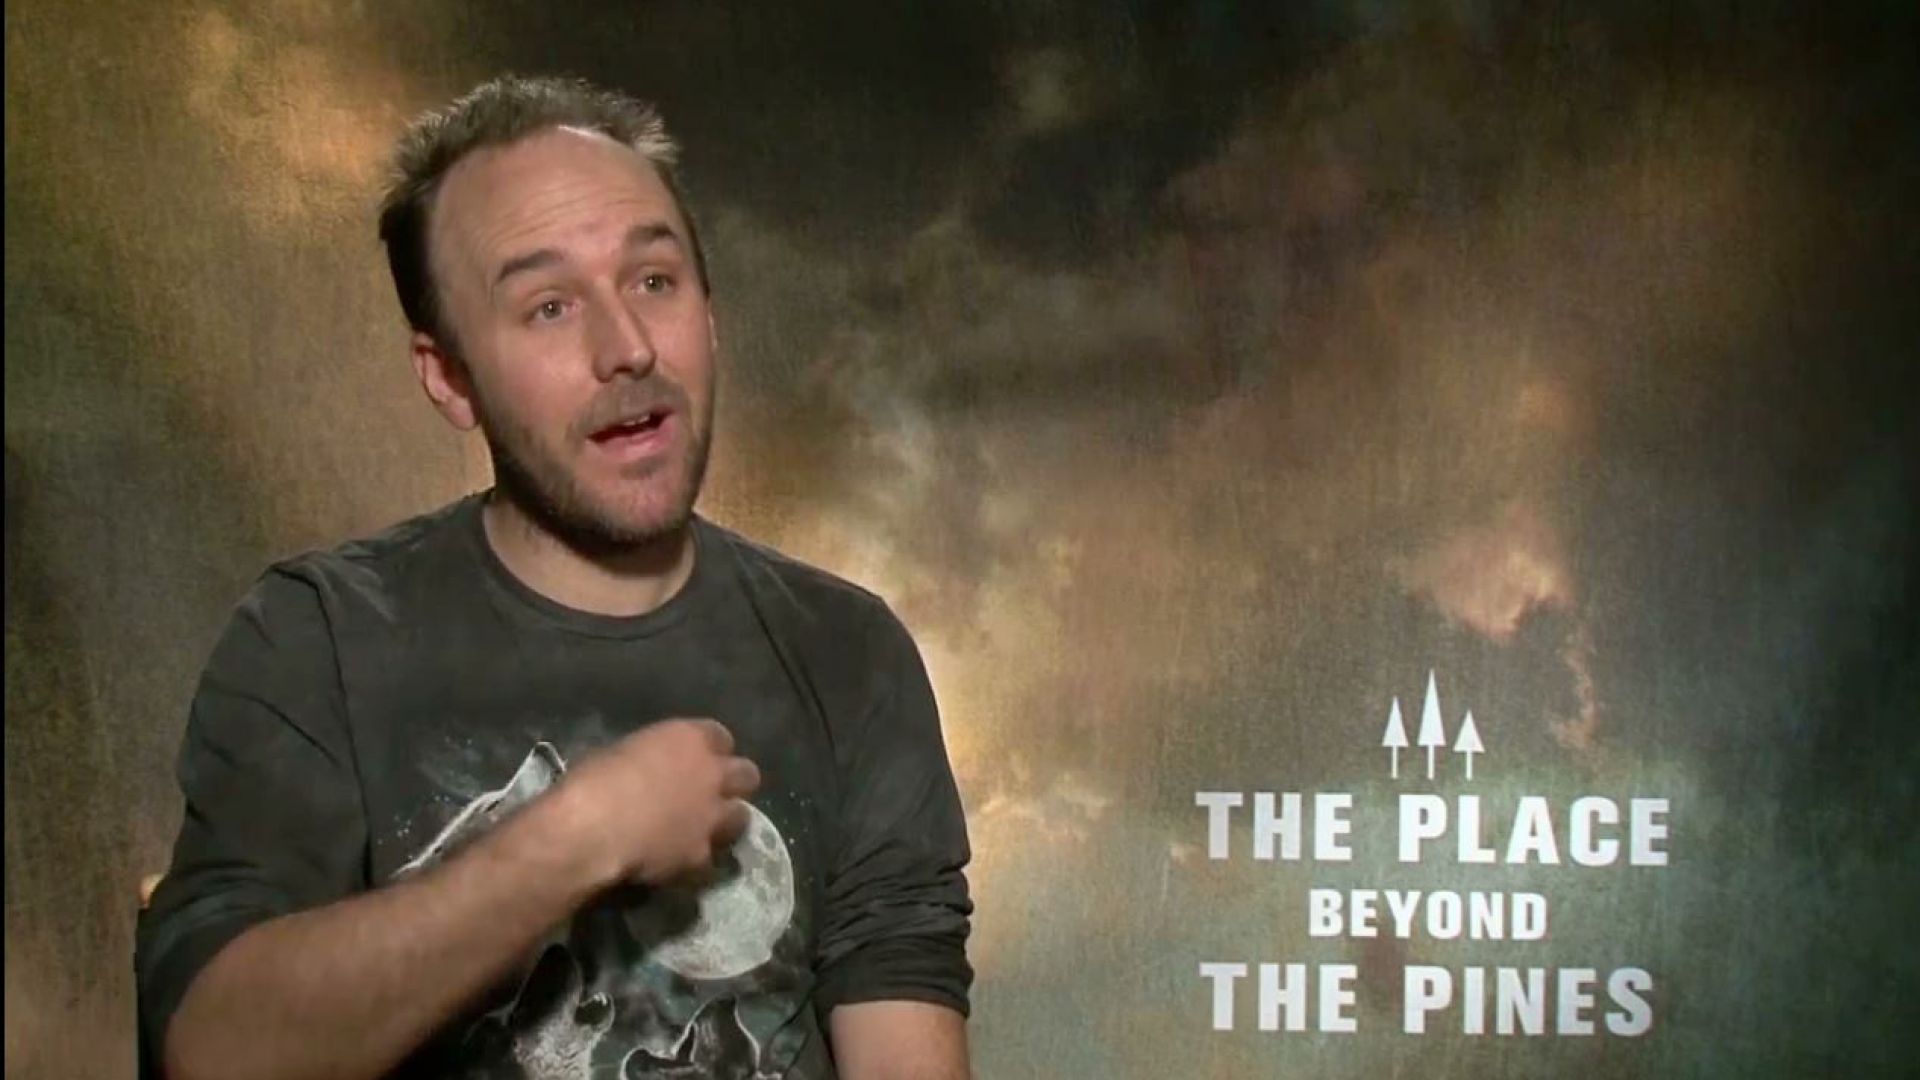 Director Derek Cianfrance on writing the father son relationship in The Place Beyond the Pines